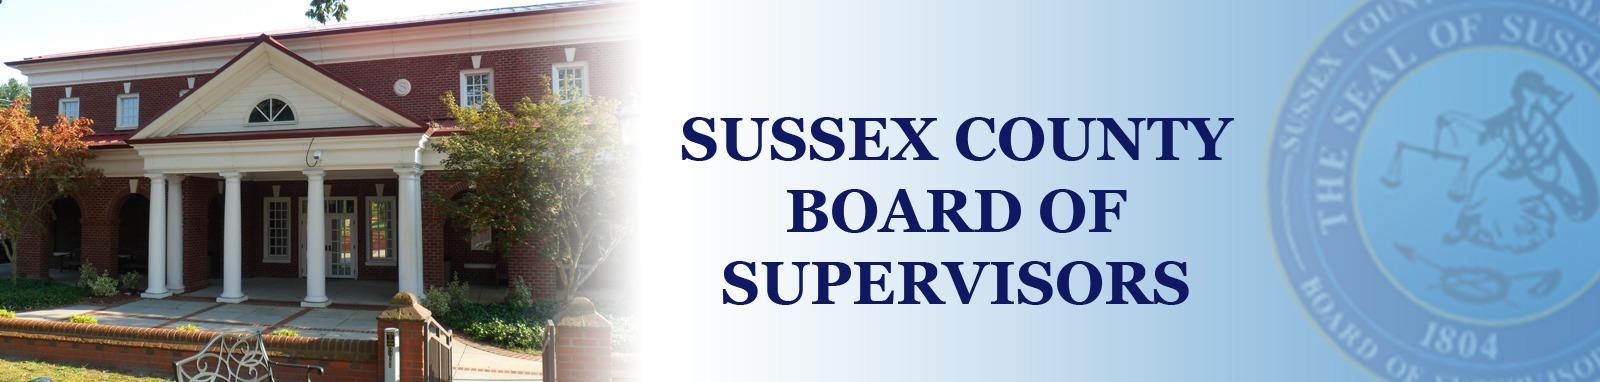 Sussex County Board of Supervisors